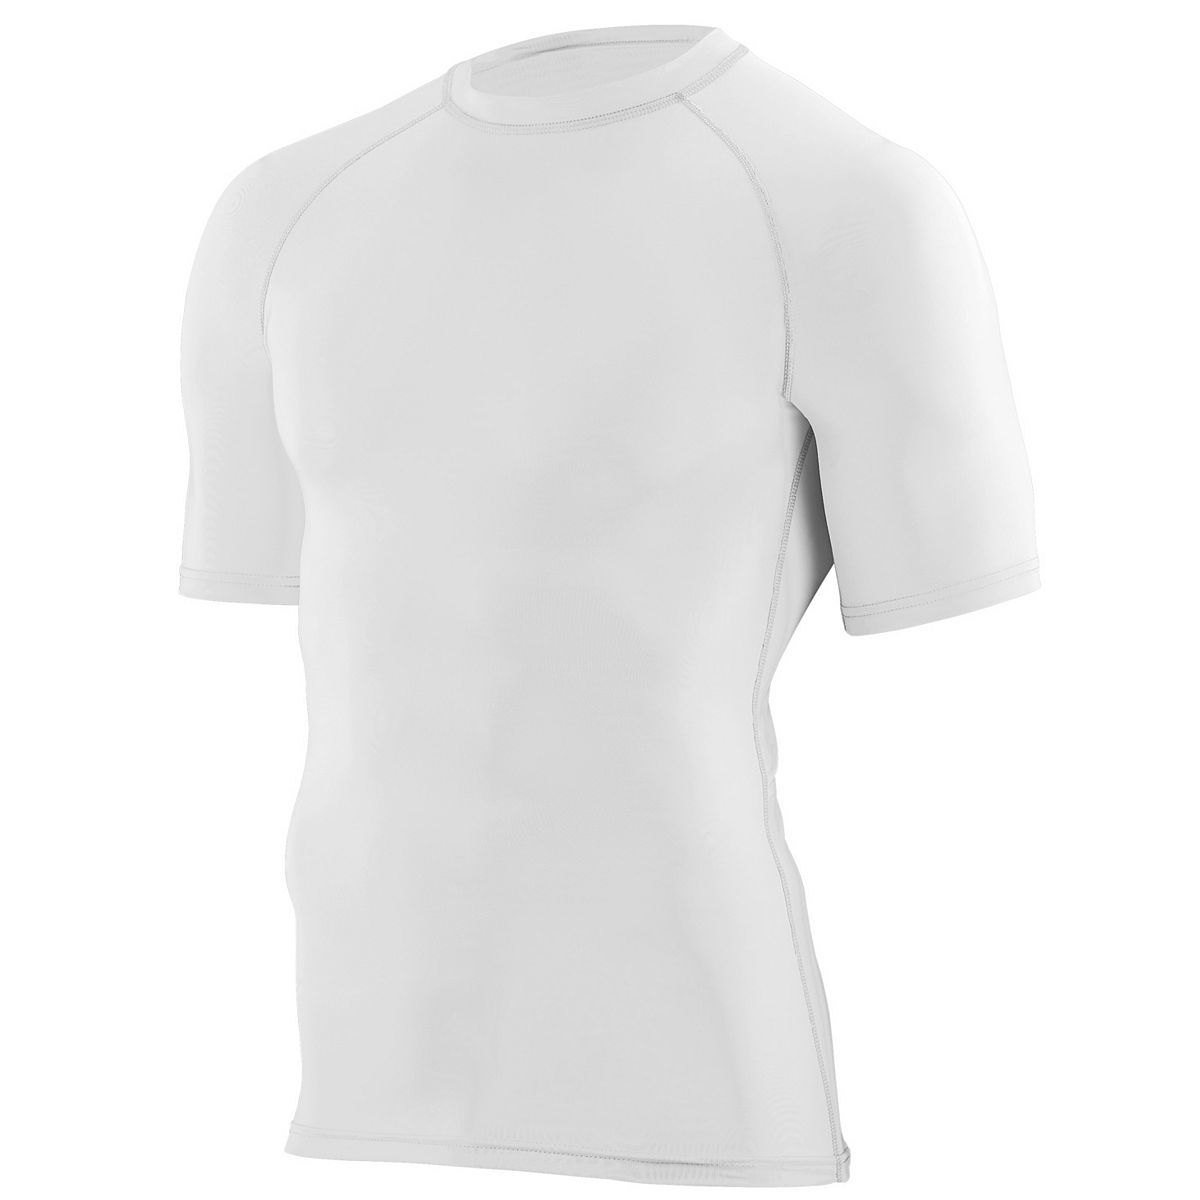 Youth Hyperform Compression Short Sleeve Tee 2601